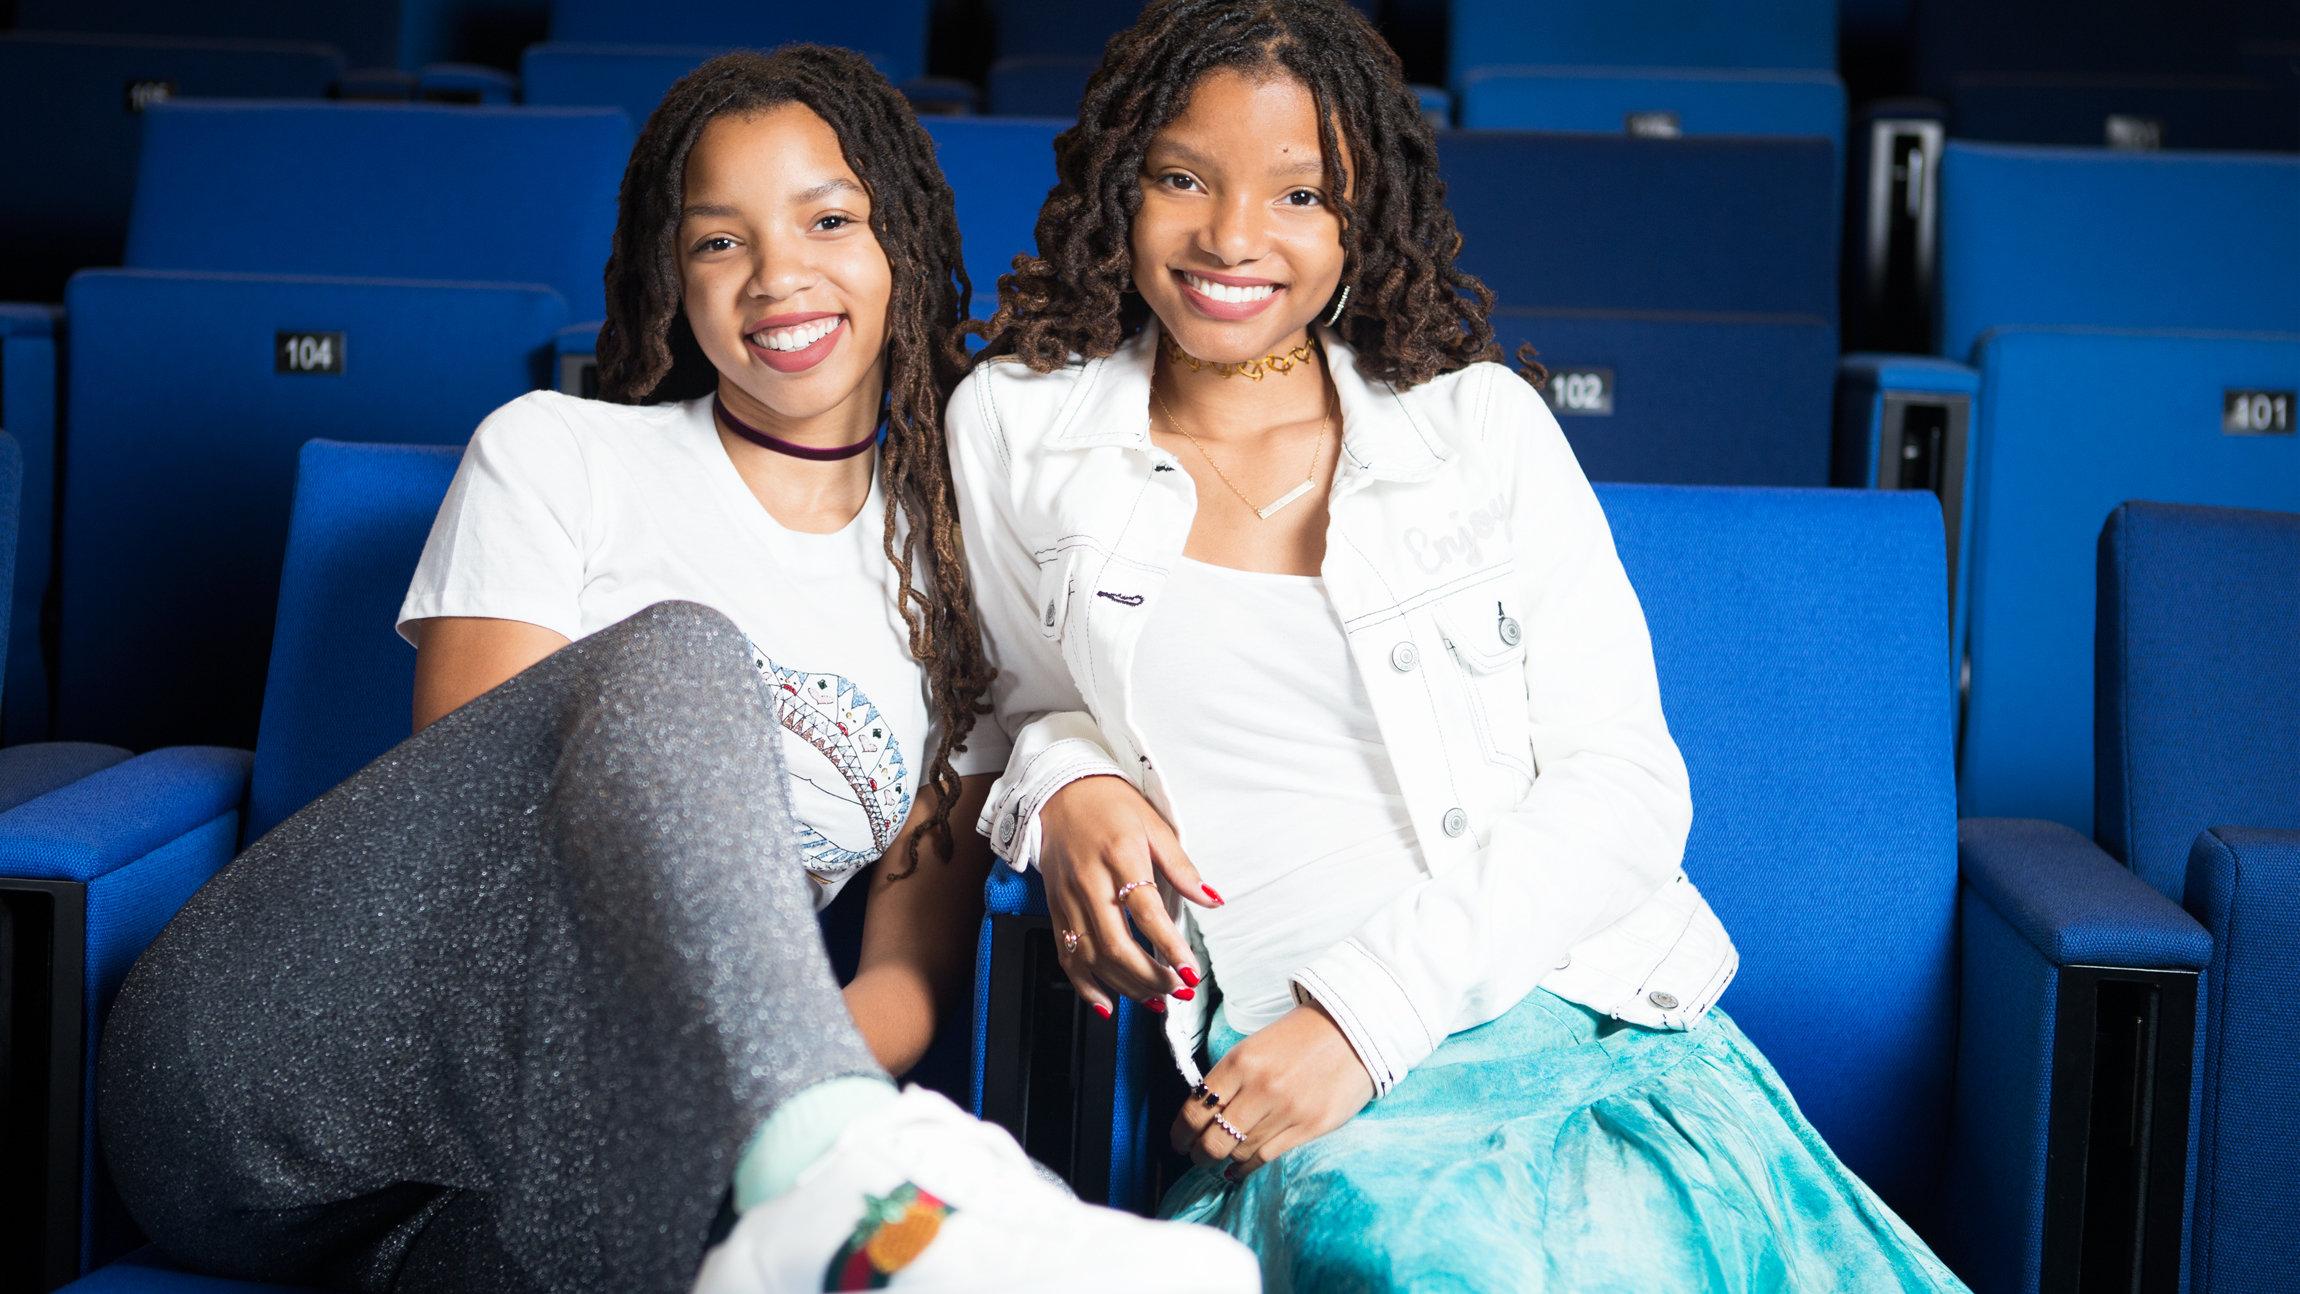 Things to Know About Chloe x Halle: Video